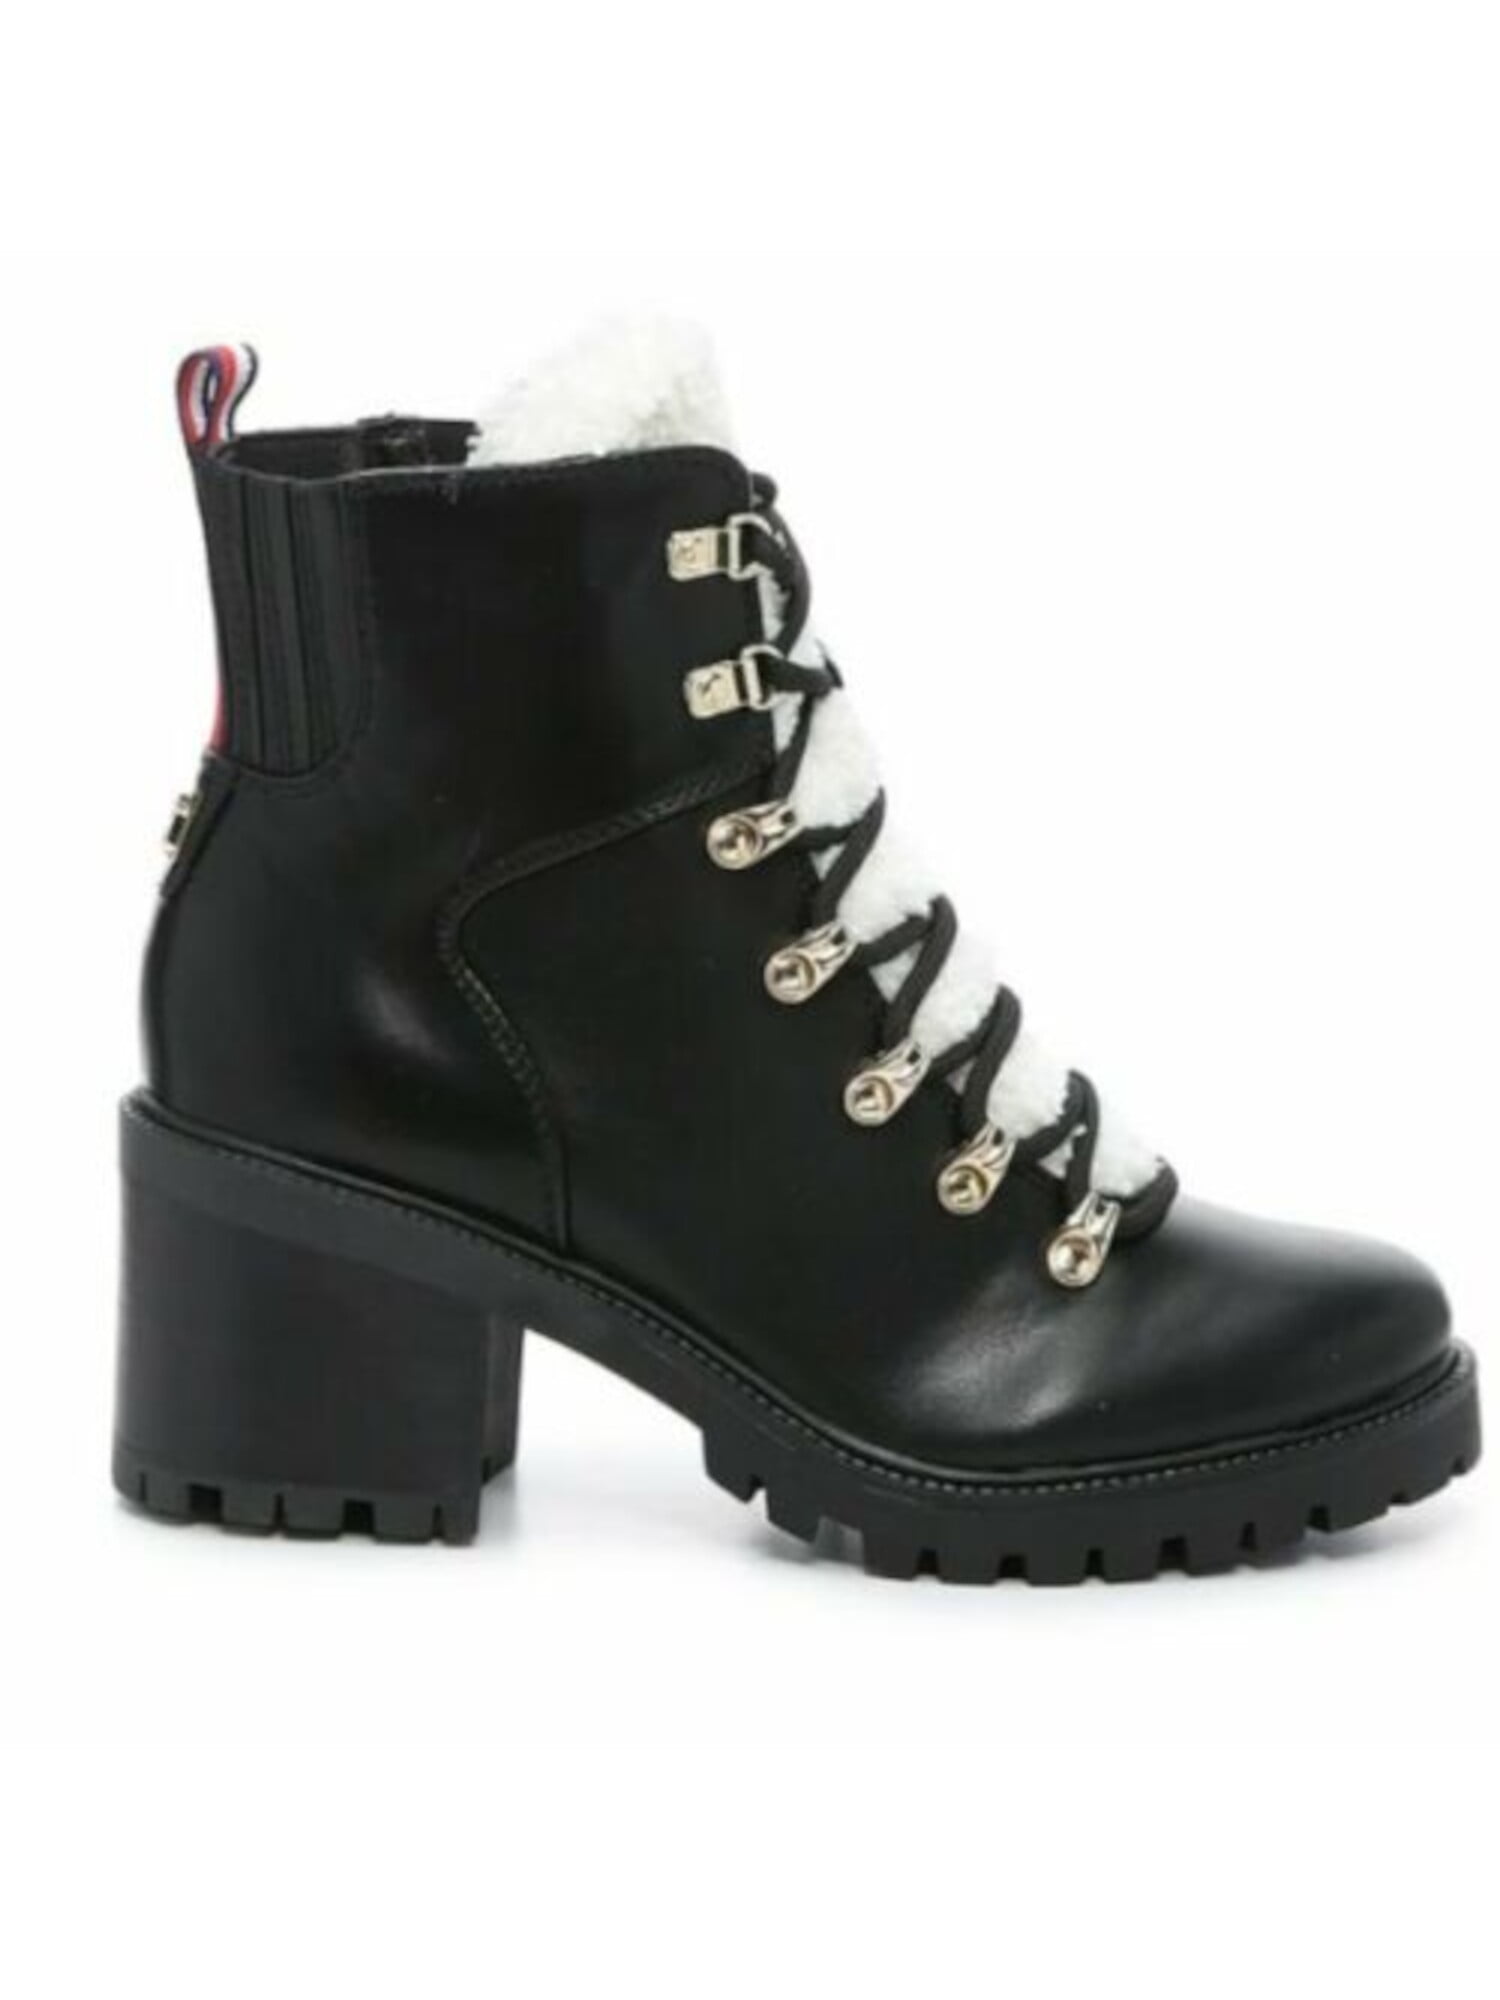 Boots Block Black 9 Combat Toe HILFIGER Womens Side Heel TOMMY Lace-Up Zip Round